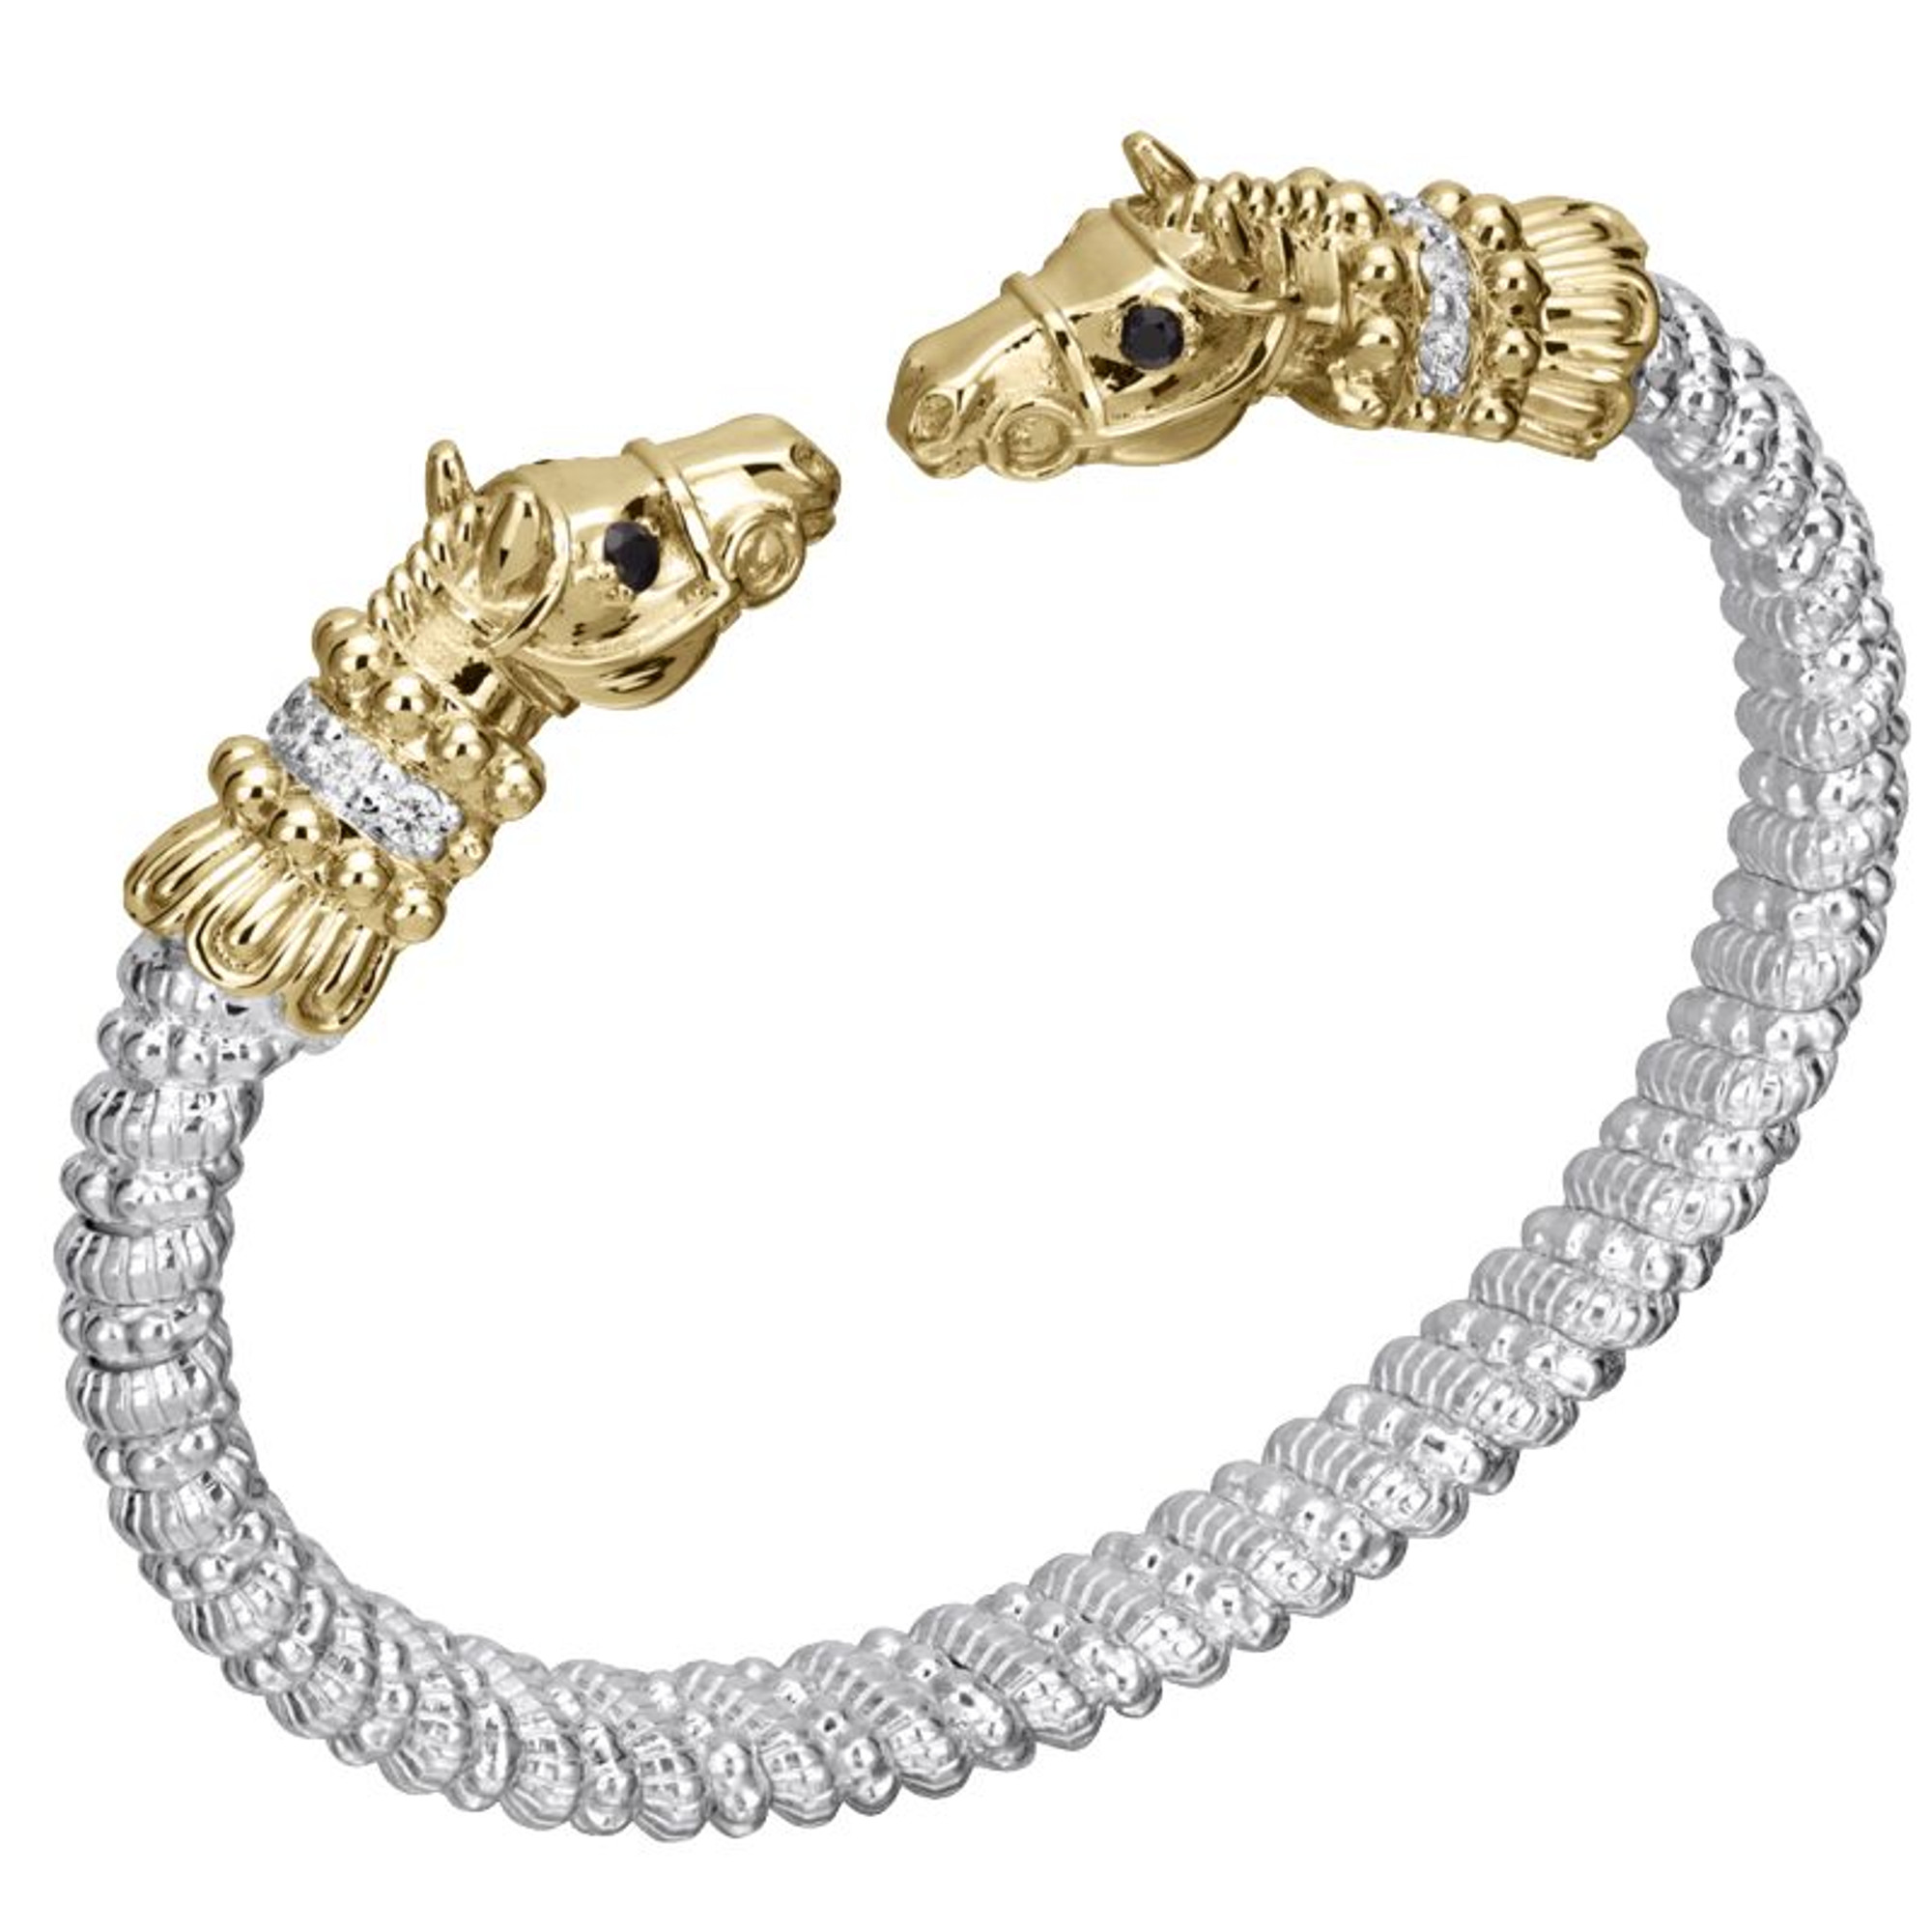 14K Gold and Onyx Horse Ends Bracelet by Alwand Vahan